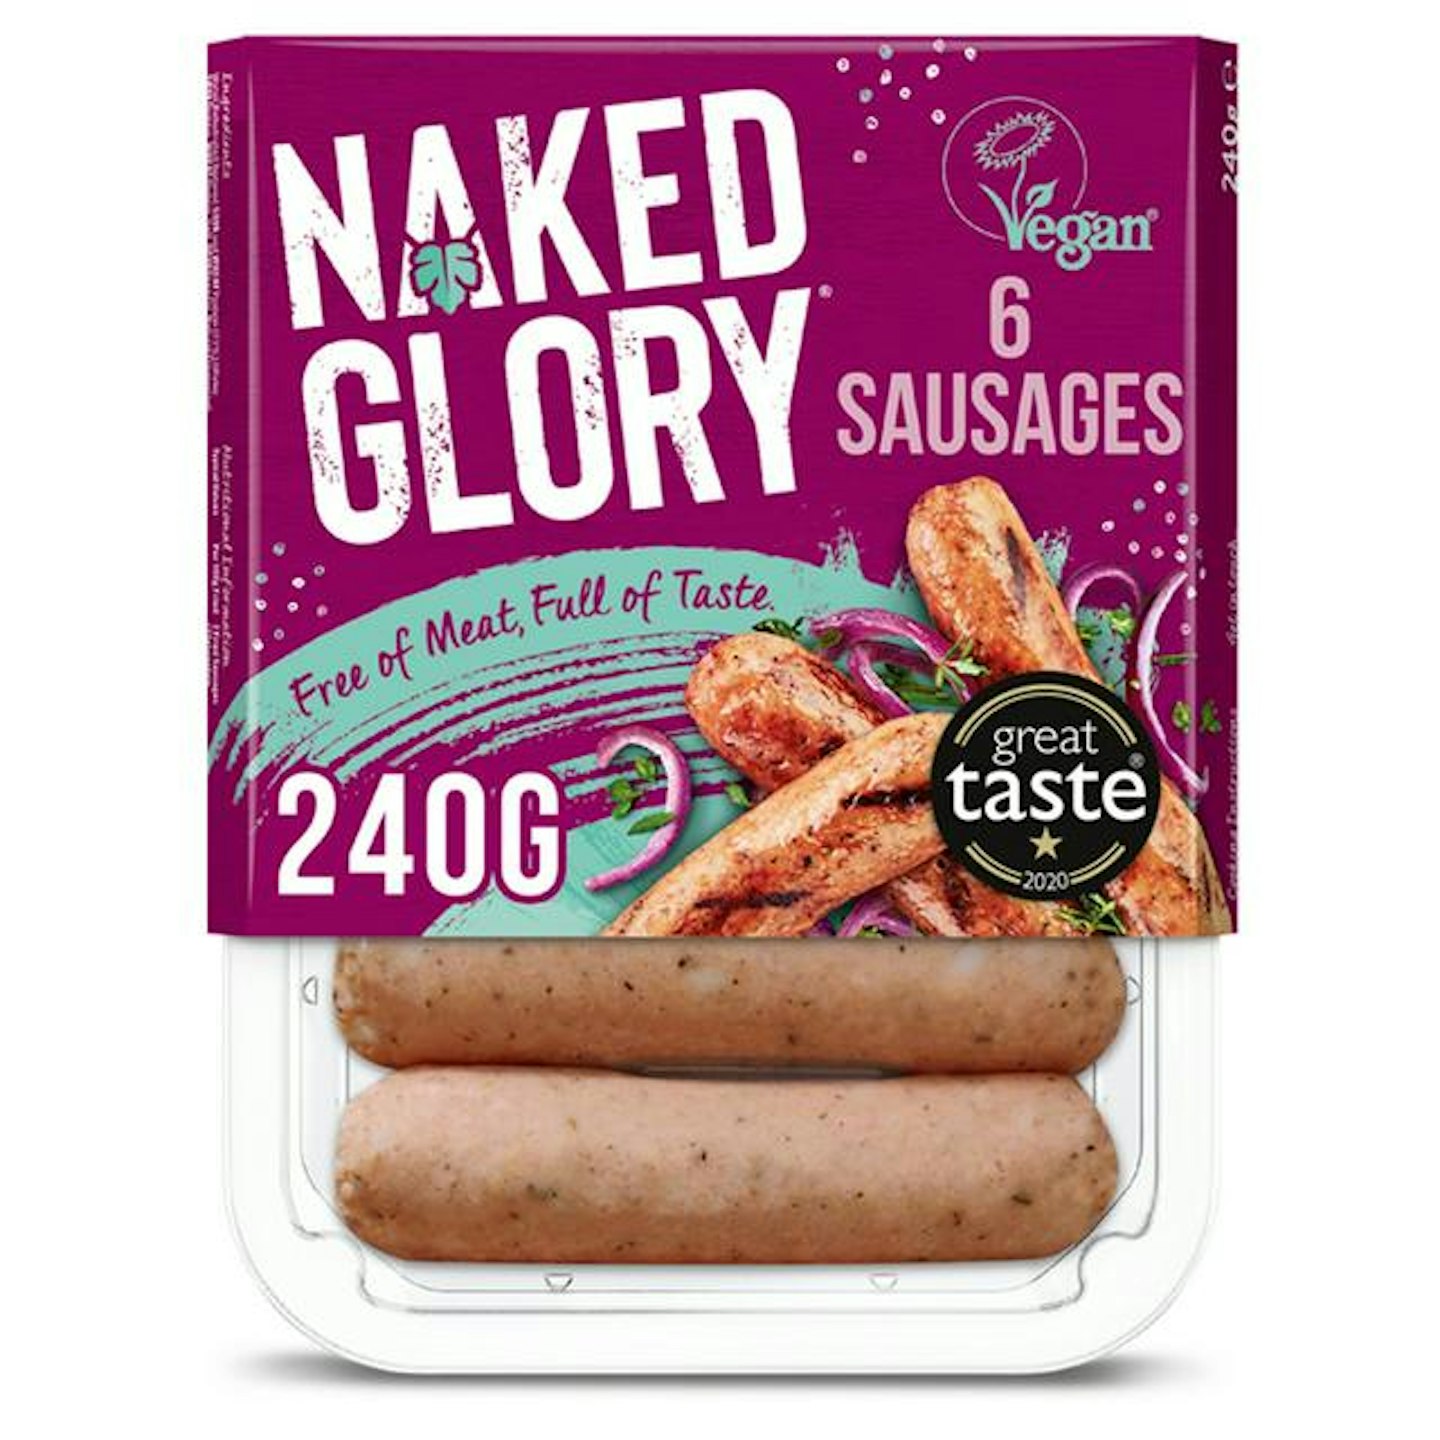 Naked Glory Sausages